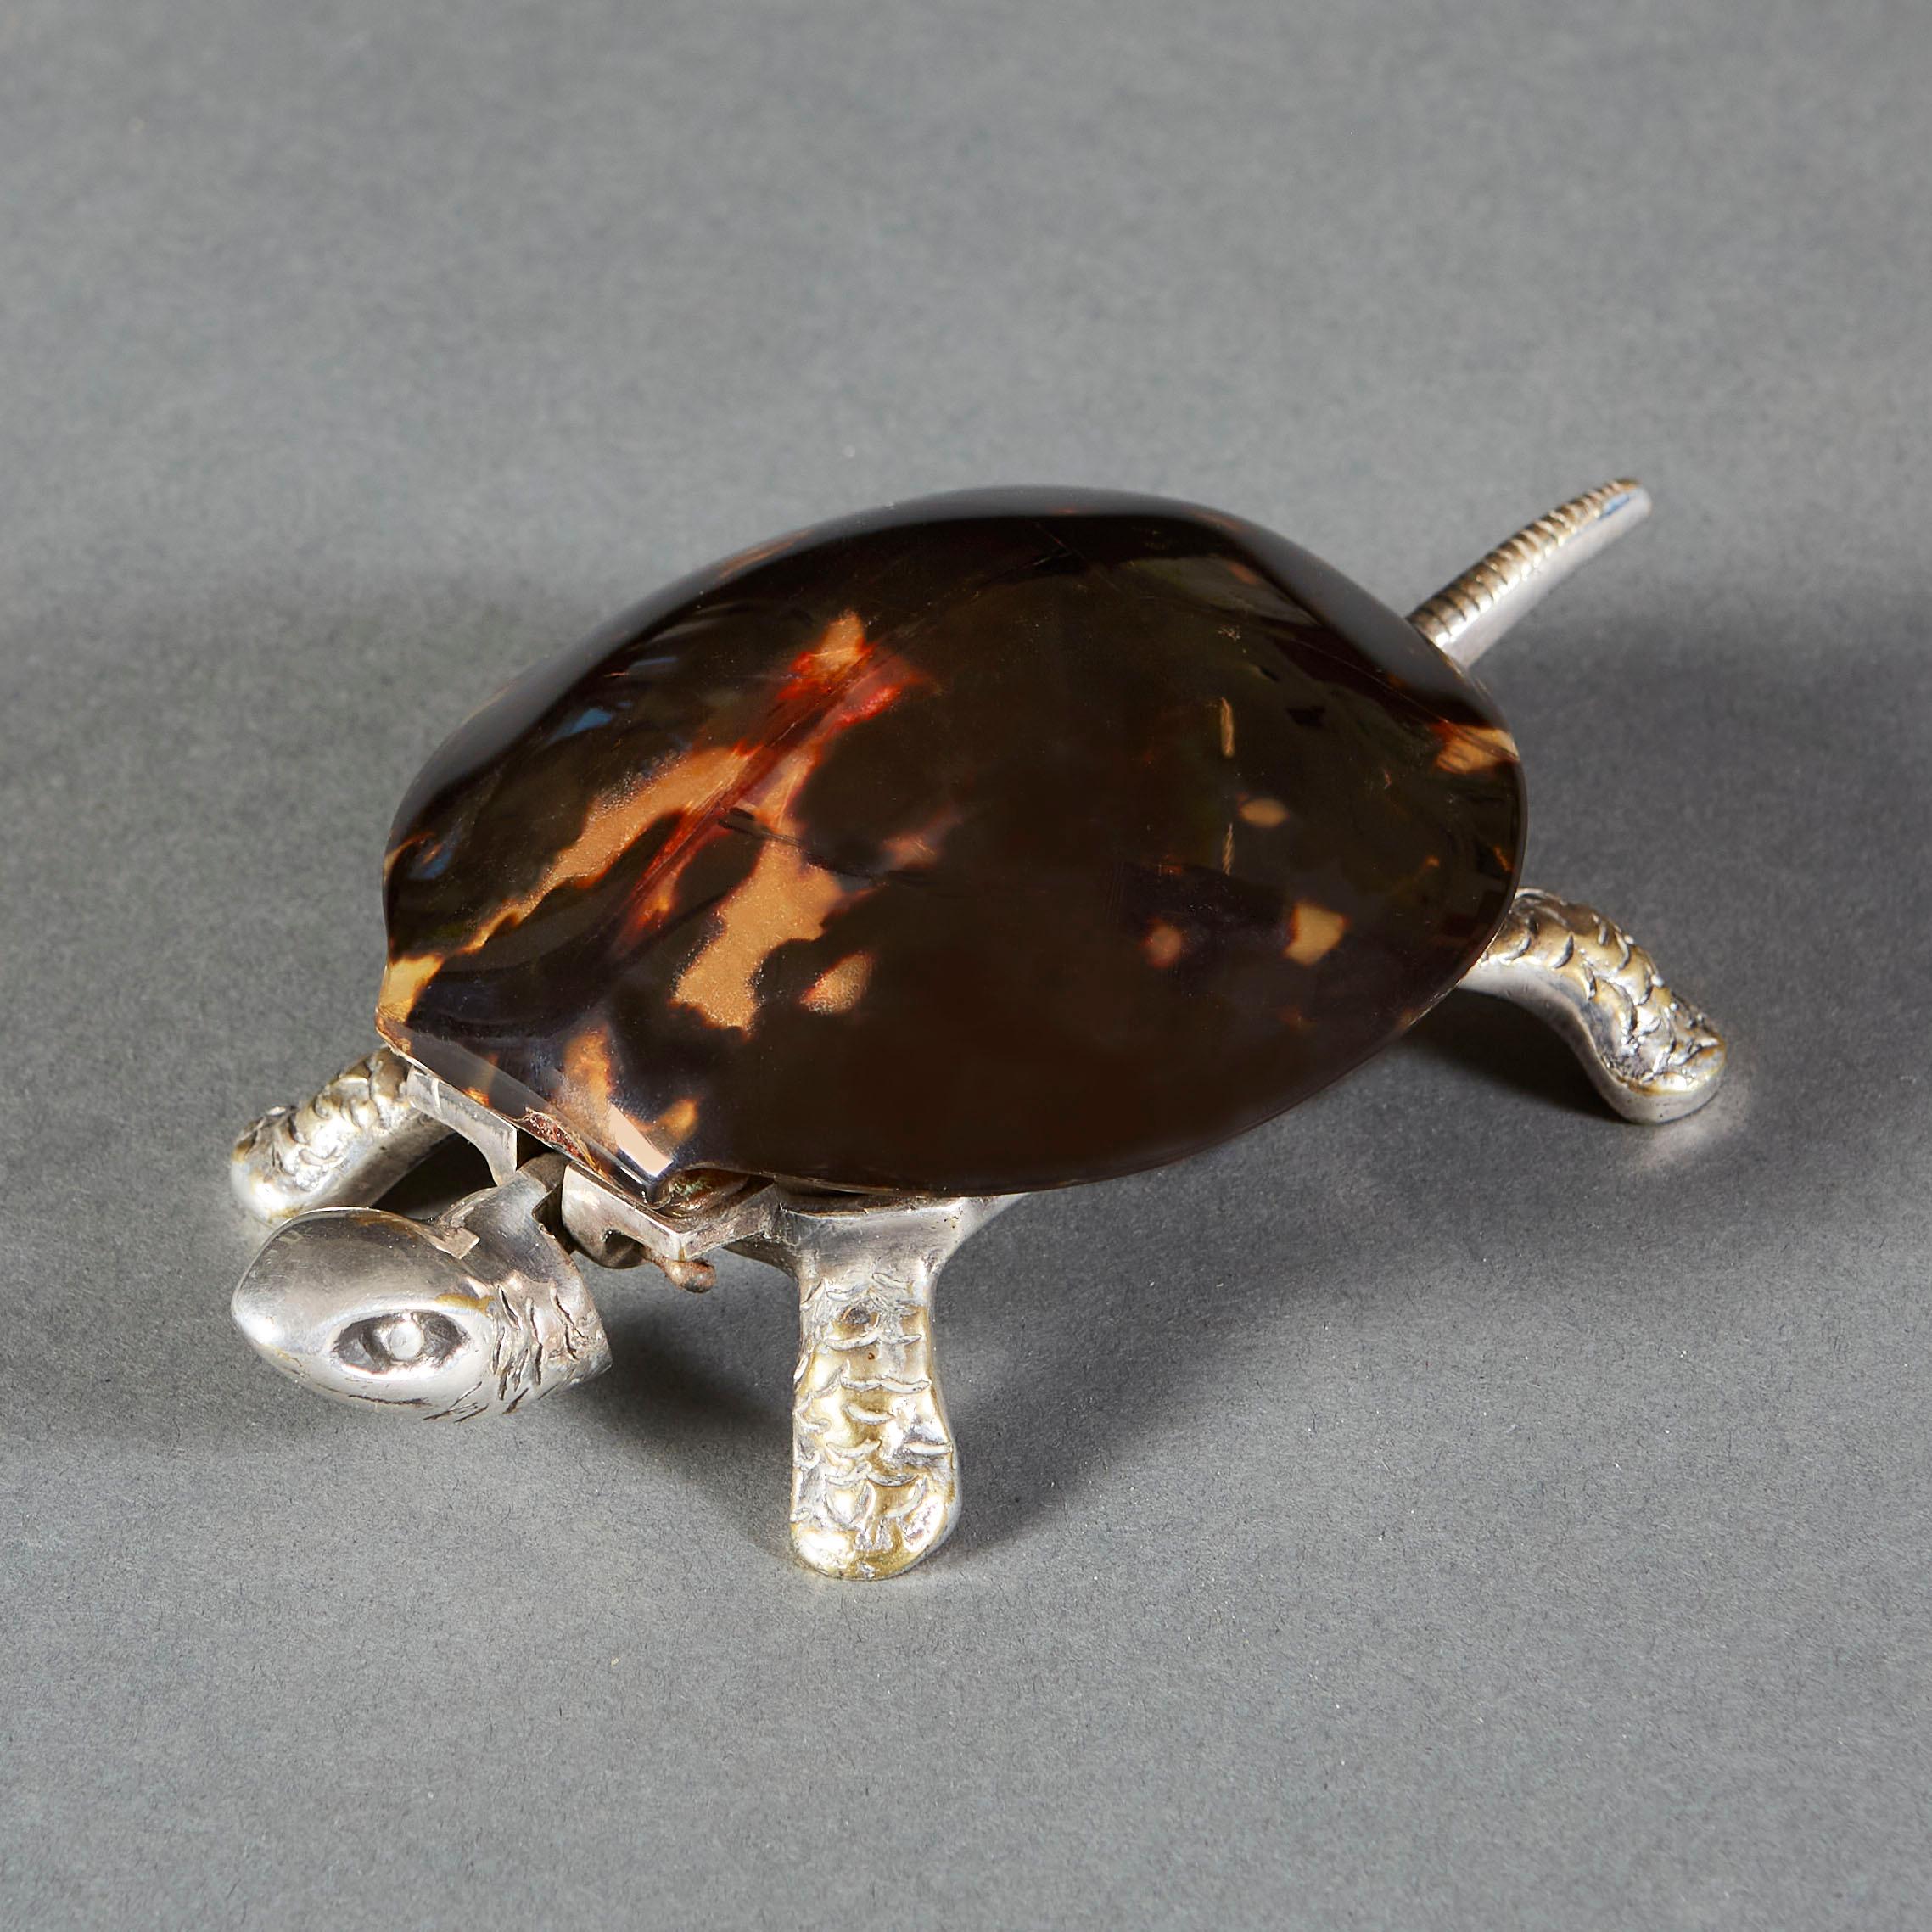 An unusual Edwardian silver plated tortoise bell, with polished tortoise shell.